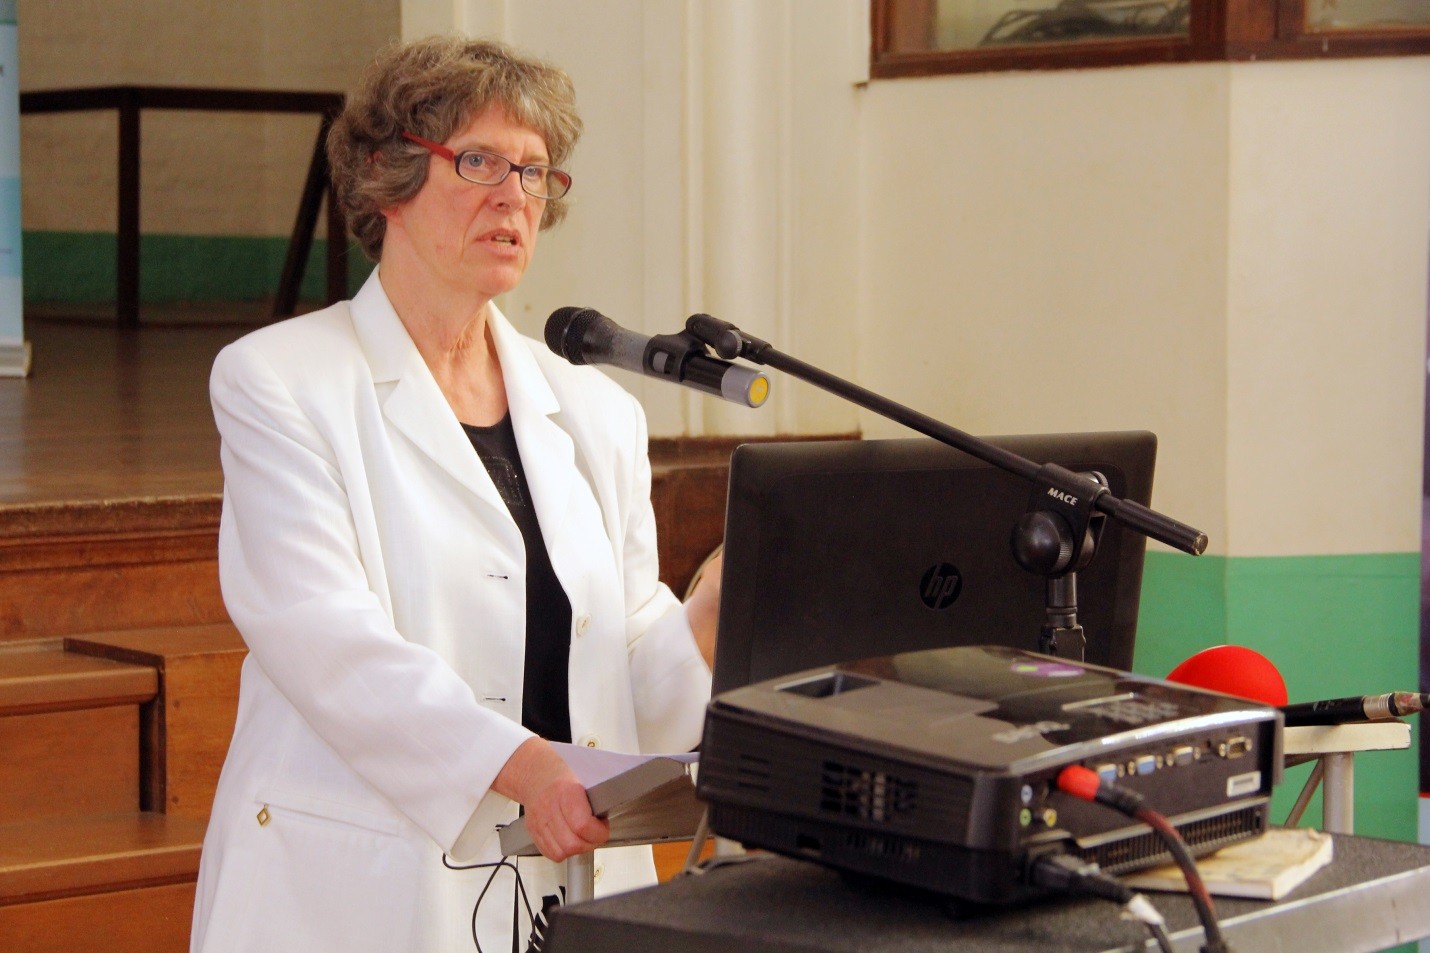 The Guest Speaker, Prof Birgitte Vennervald giving the keynote address. She called upon the government to incorporate health studies in school curriculums in the fight against Schistosomiasis.